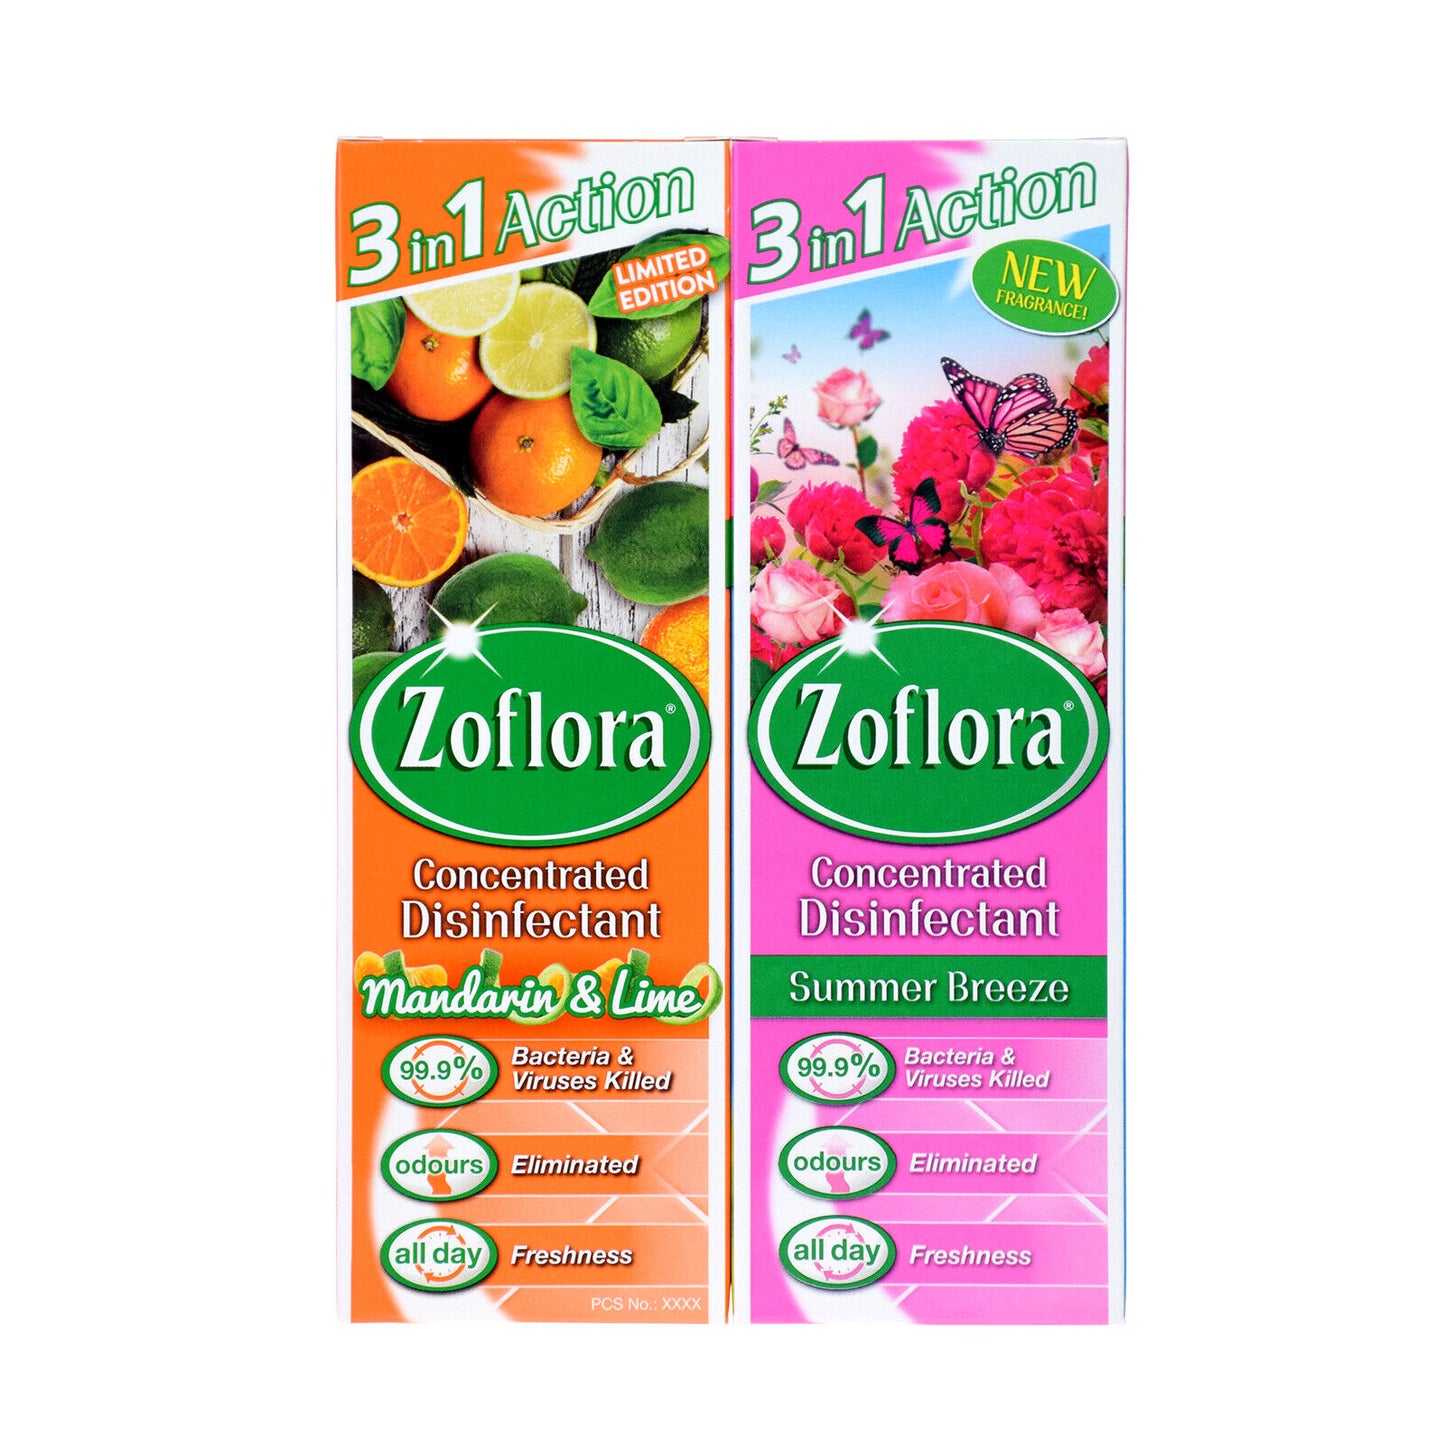 Zoflora Concentrated Disinfectant Summer Breeze and Mandarin & Lime 250ml